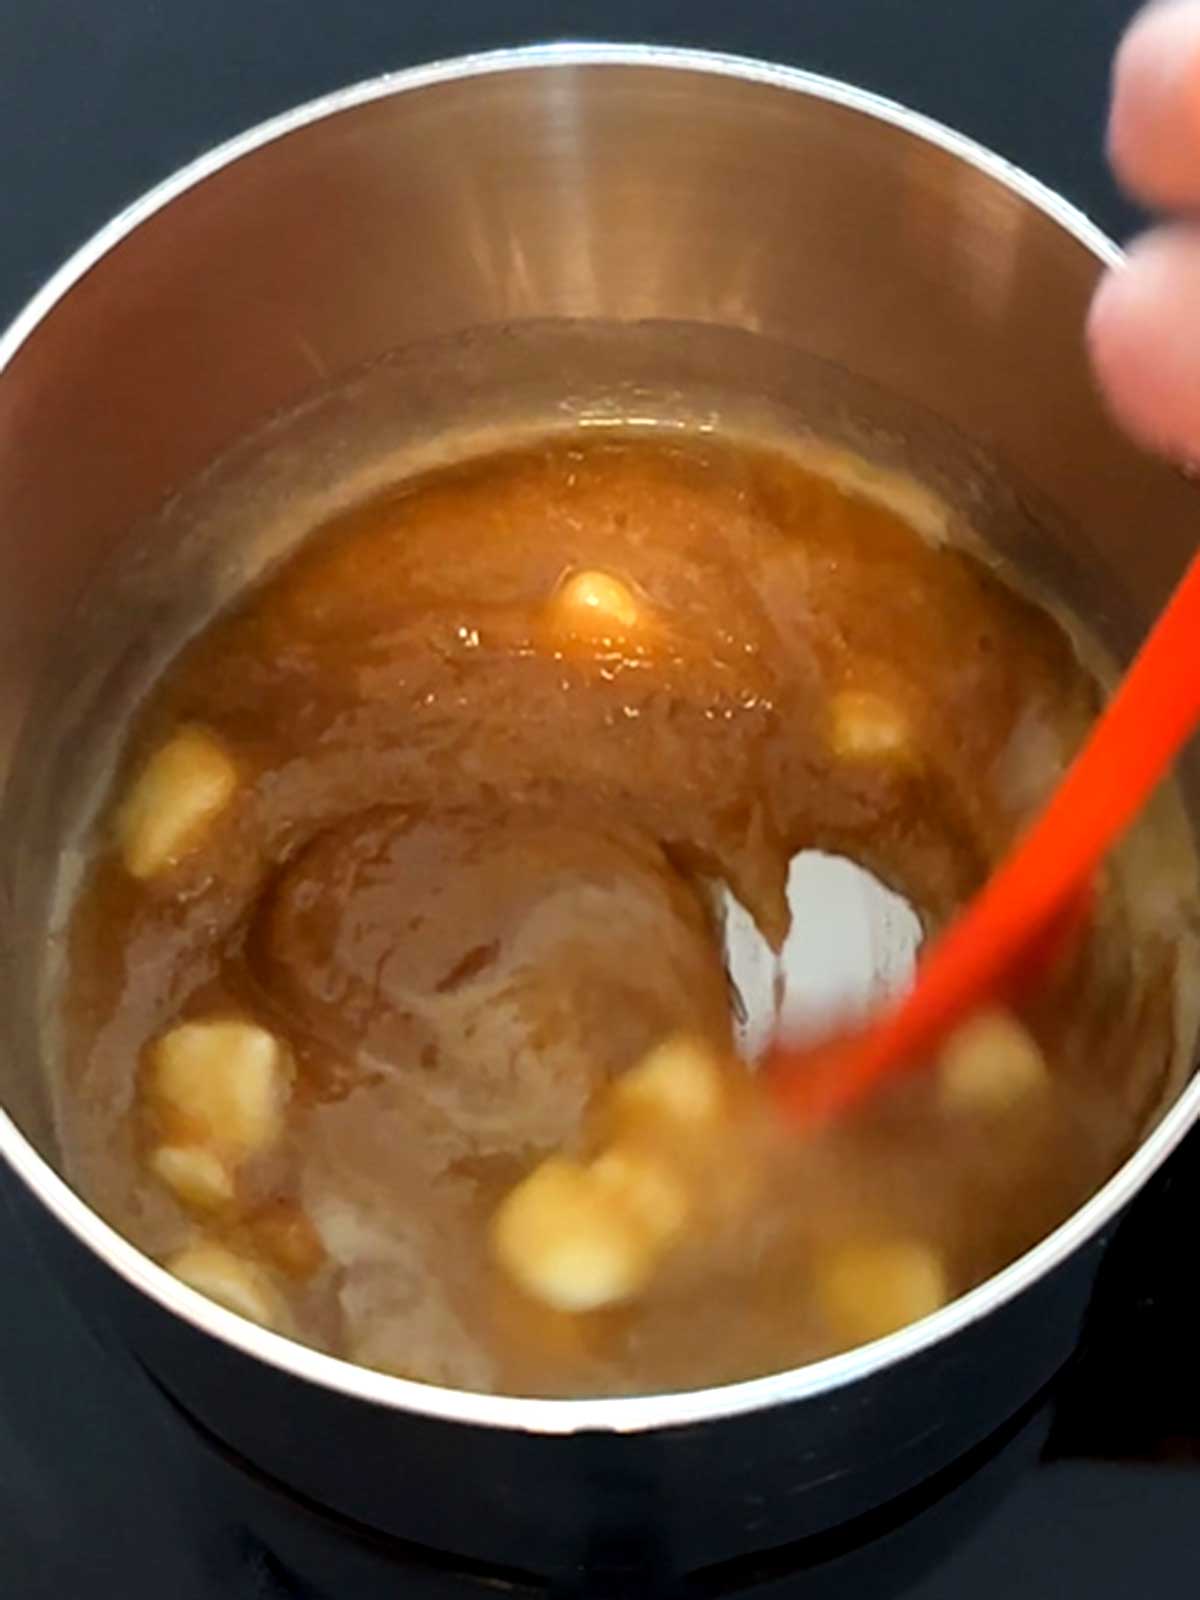 Stirring the caramel mixture until the butter melts.